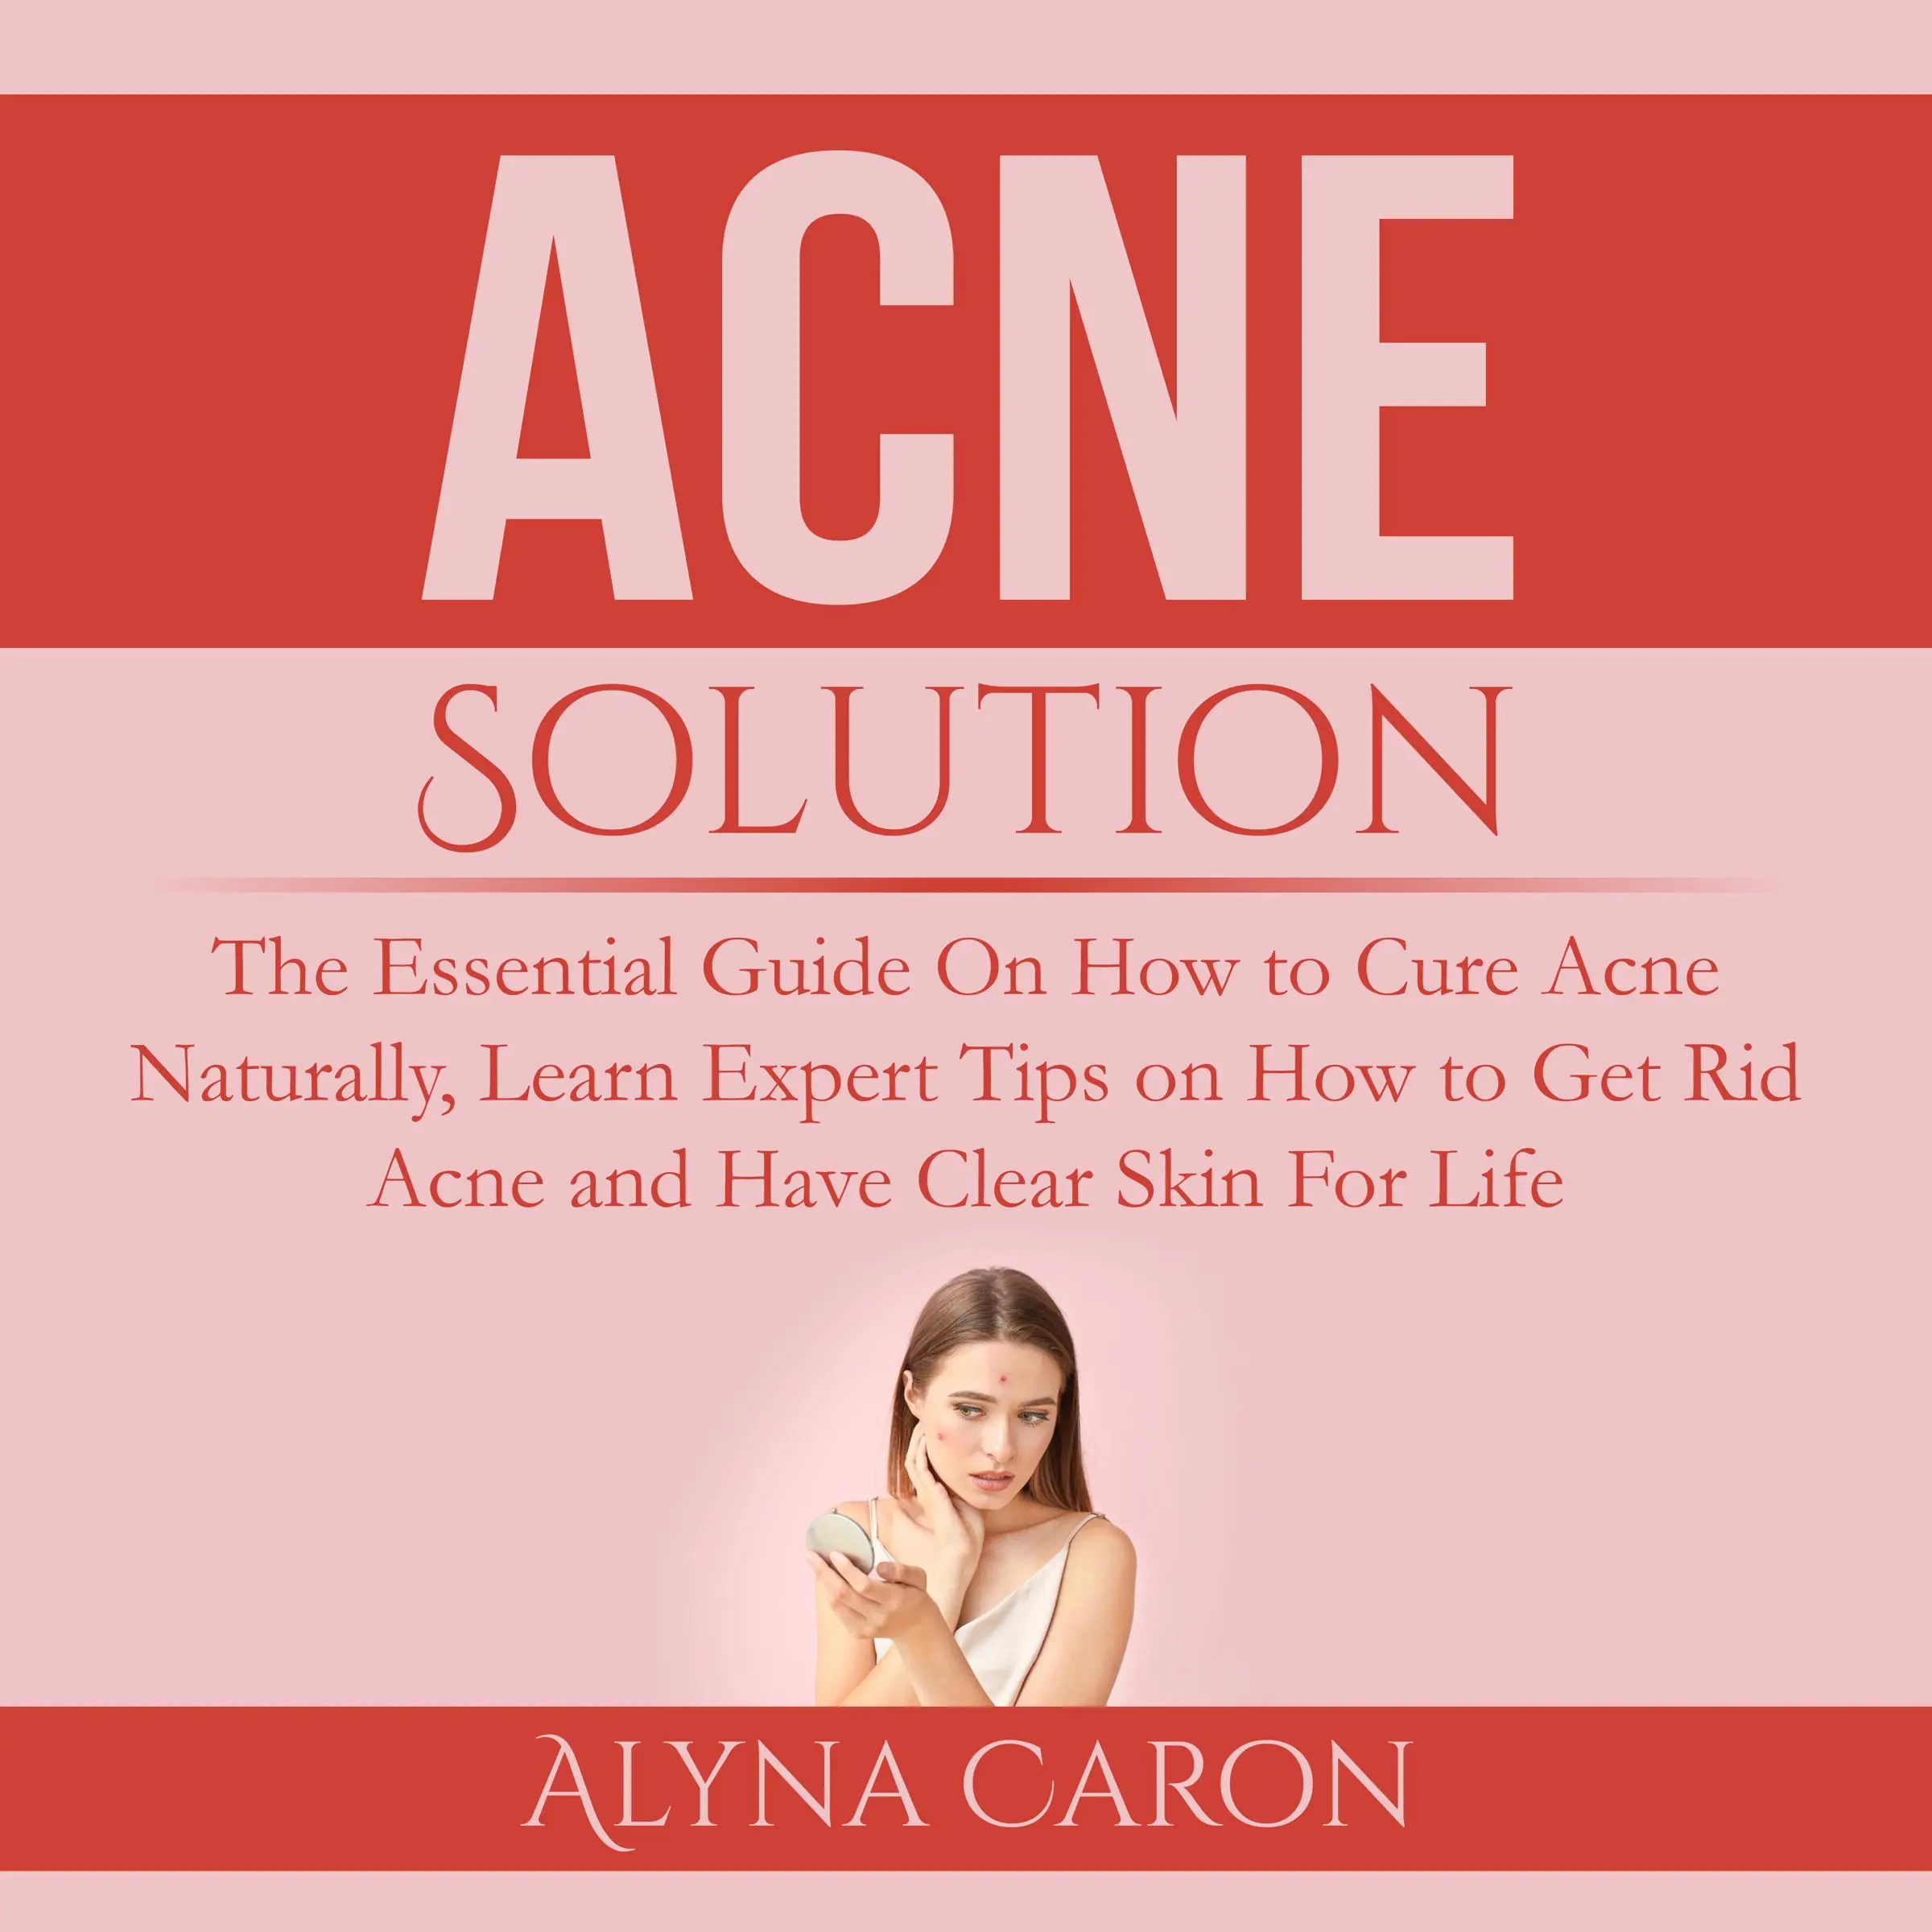 Acne Solution by Alyna Caron Audiobook